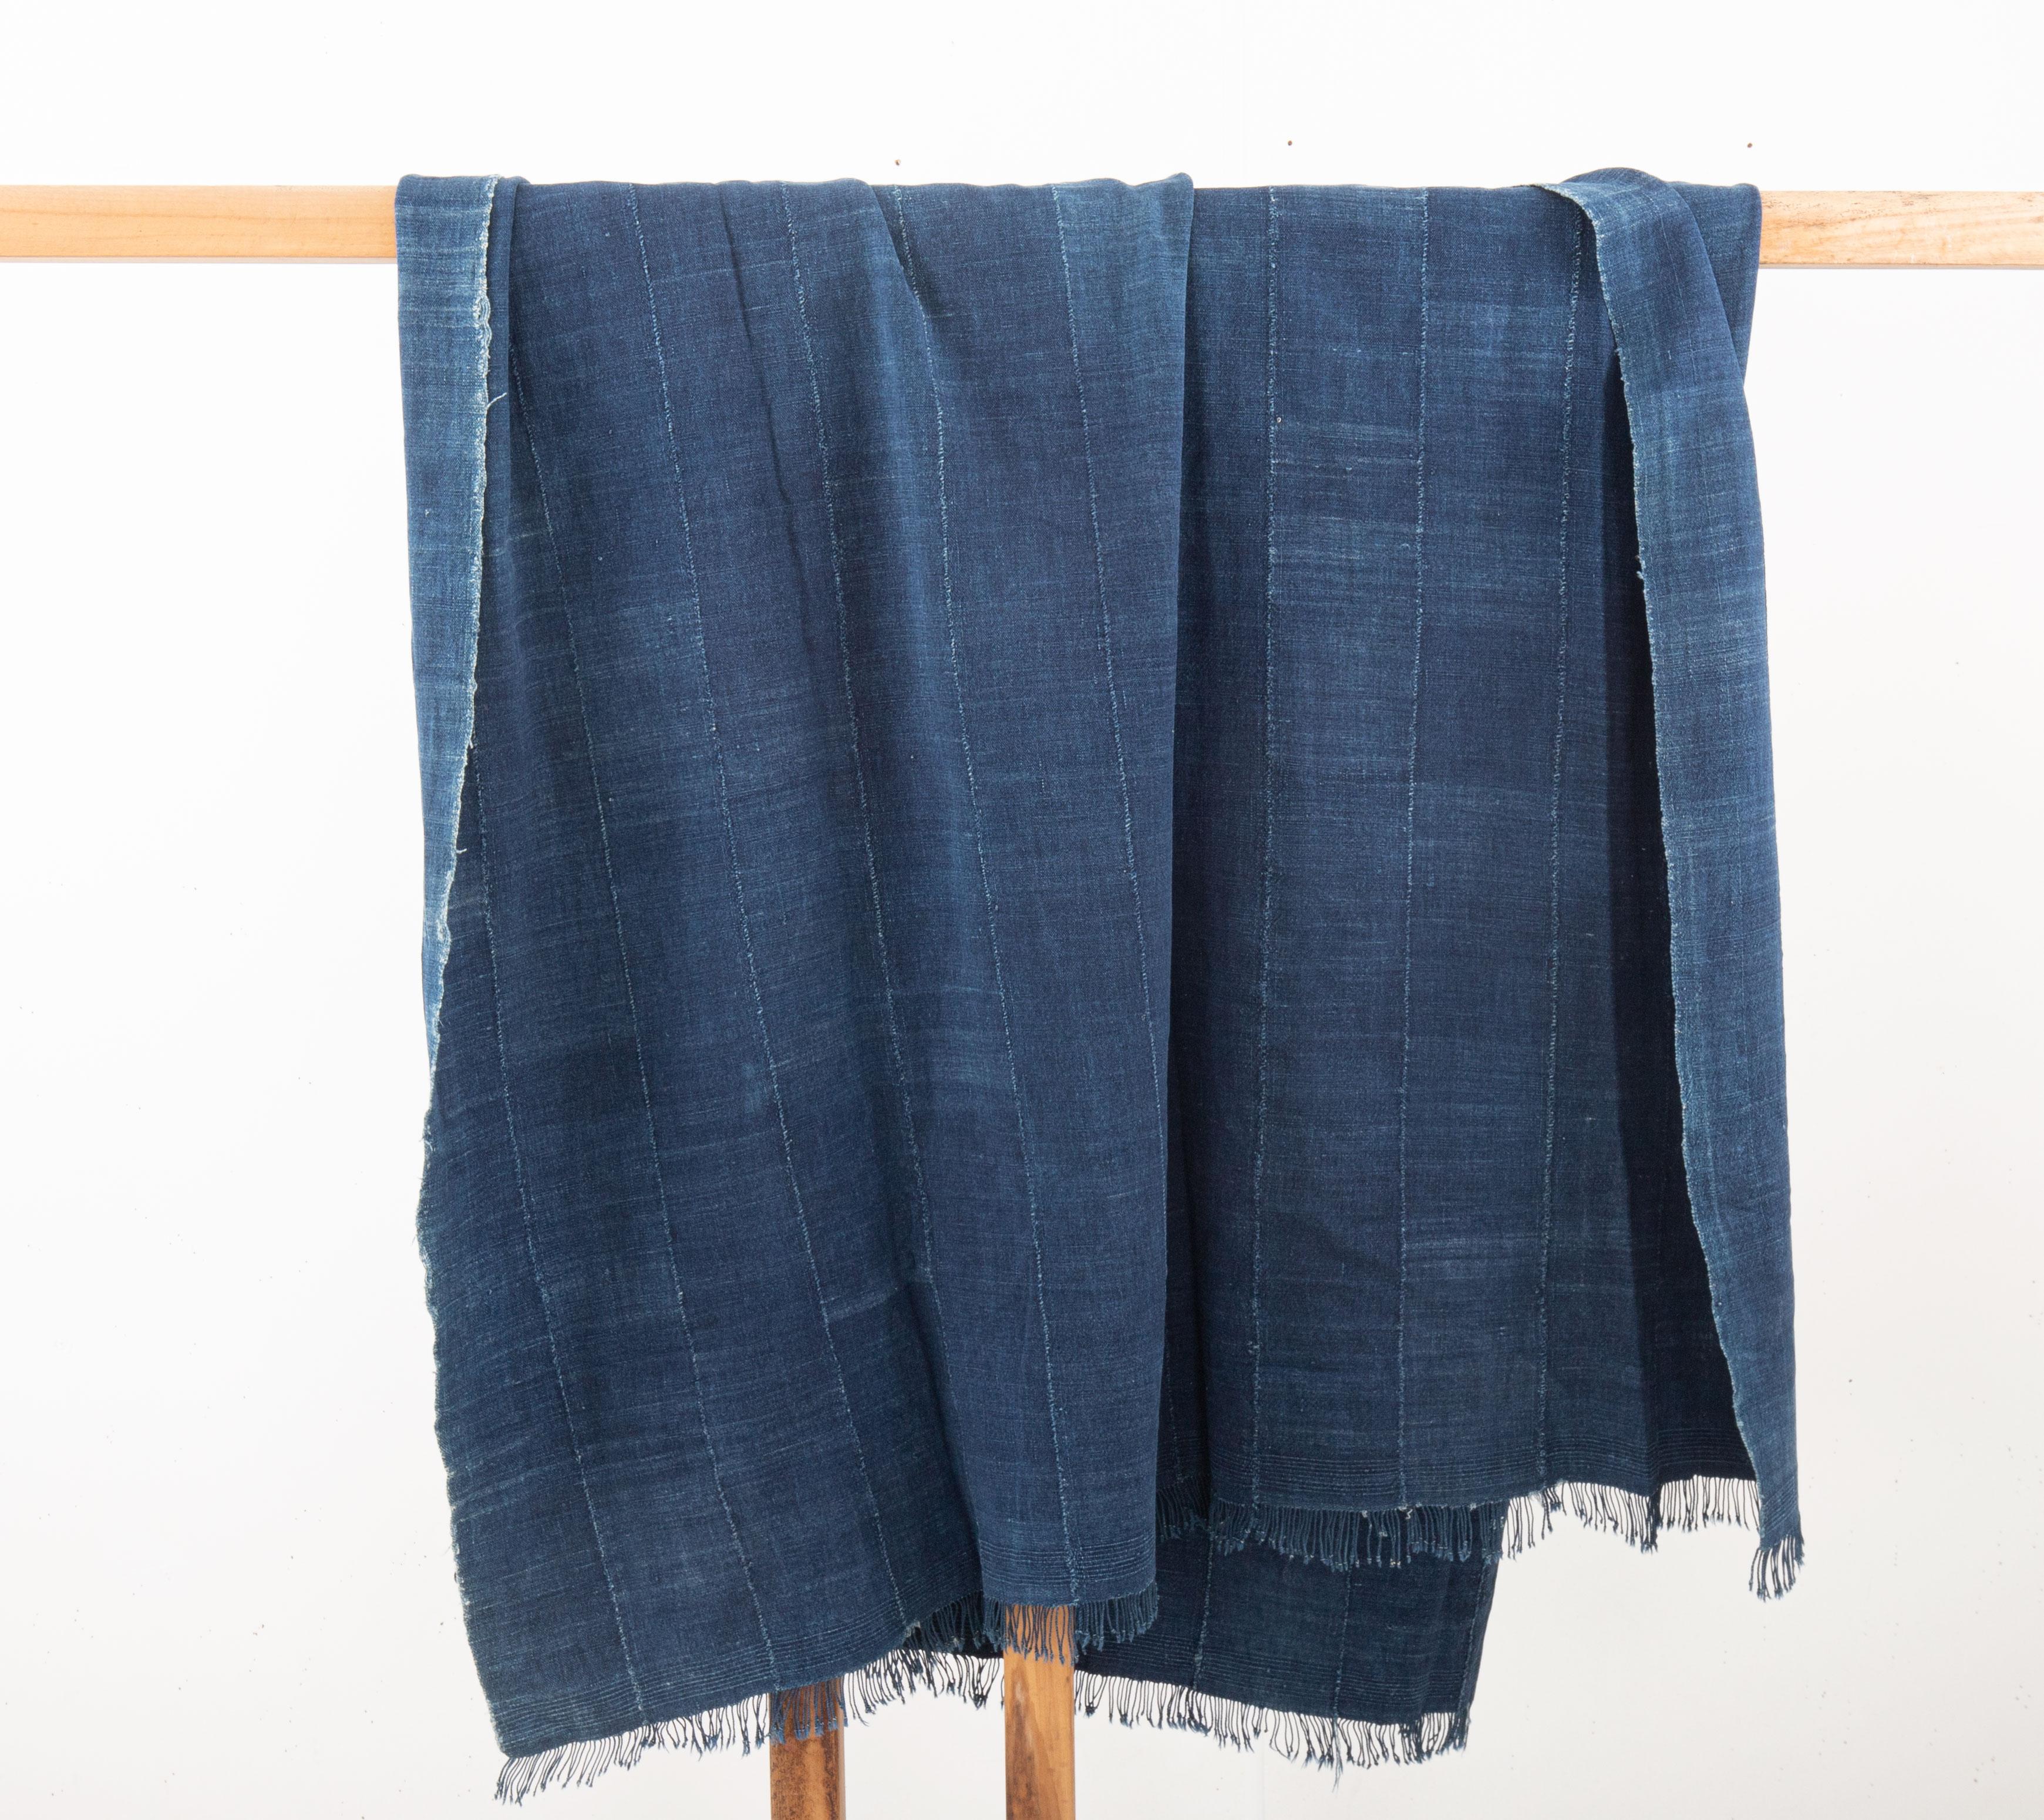 Mali indigo cloth refers to the traditional textiles produced in Mali, West Africa, using indigo dye. These fabrics are an integral part of Mali's rich cultural heritage and have gained international recognition for their distinctive blue hue and